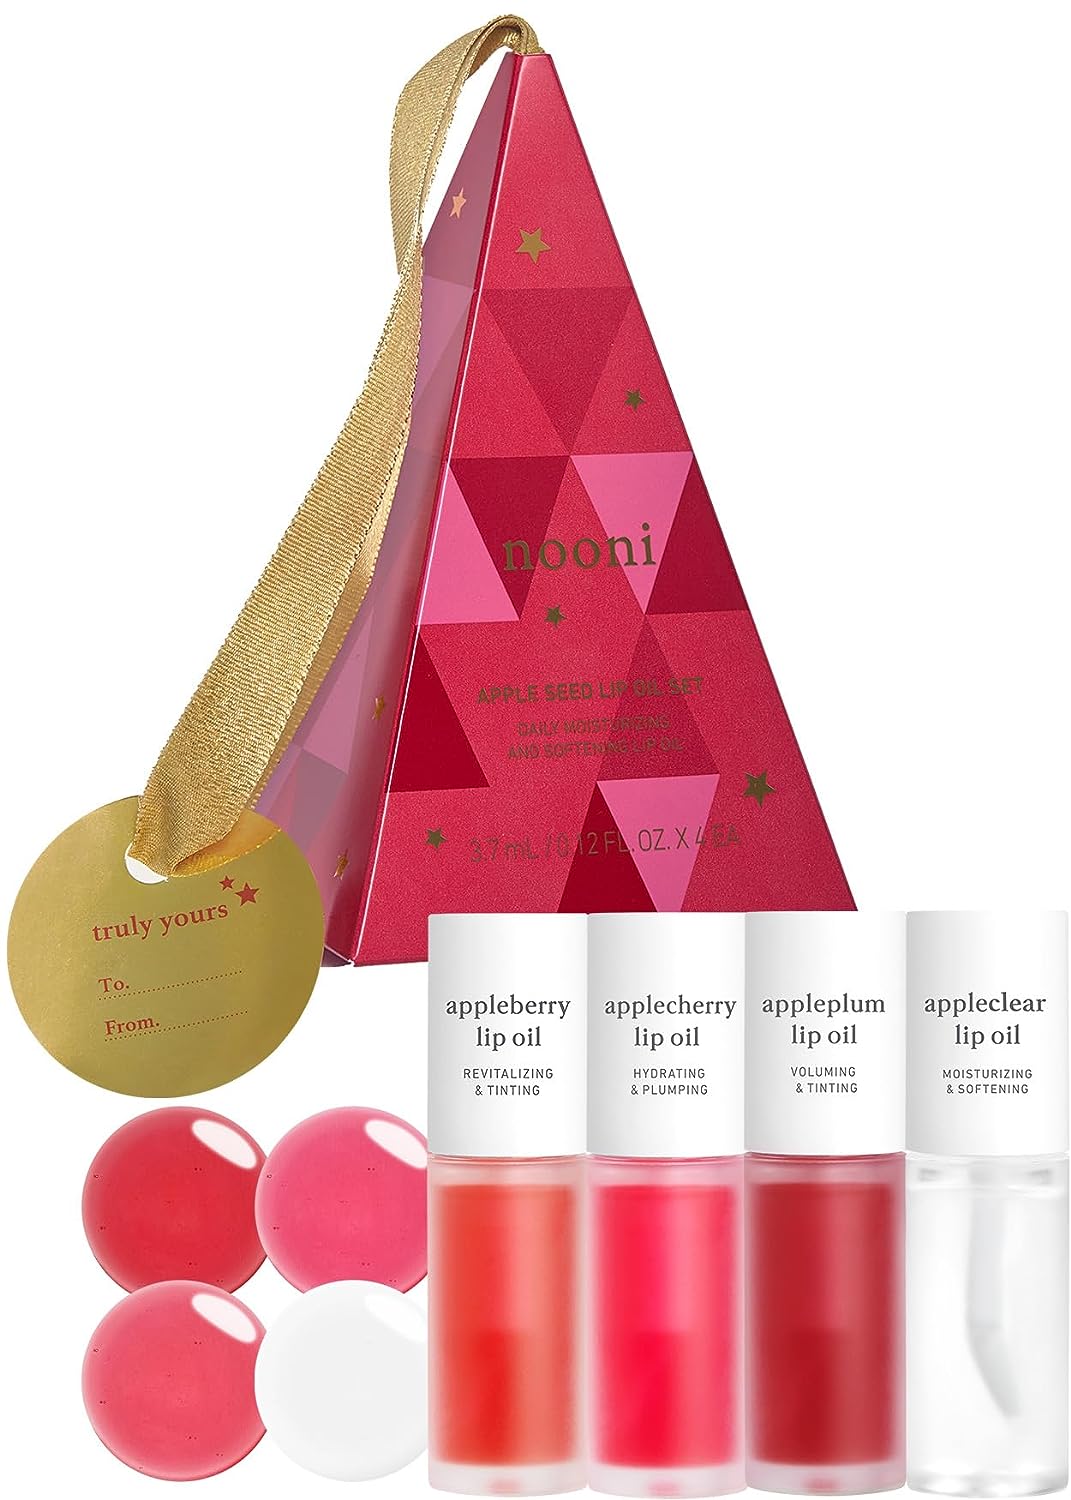 appleseed lip oil gift set with gift box and card